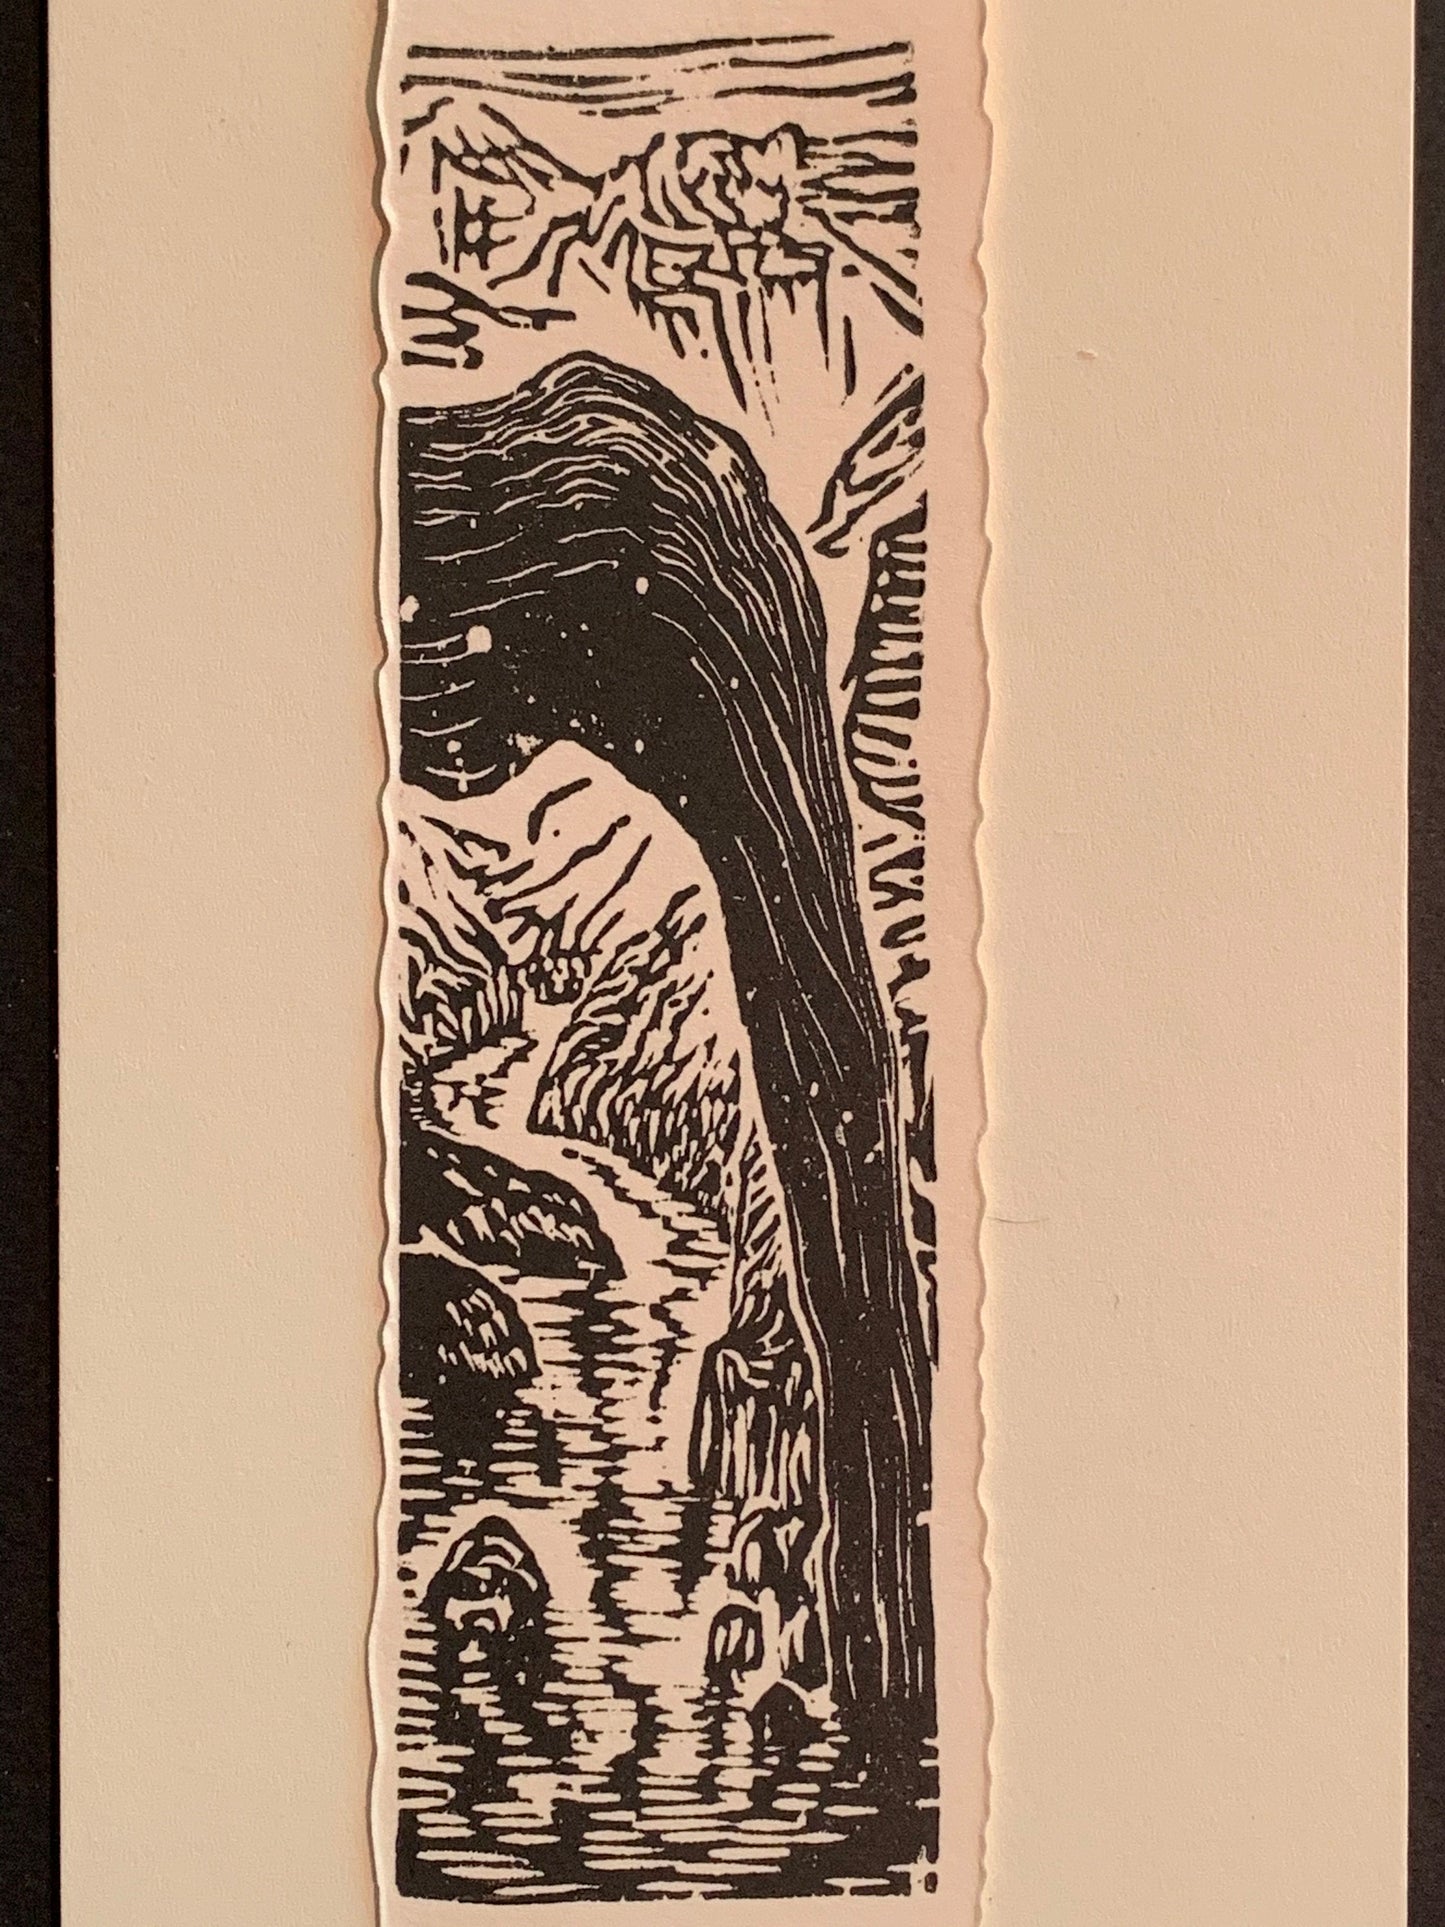 River Under a Natural Bridge original woodcut small print from Water in the Desert Landscape Collection